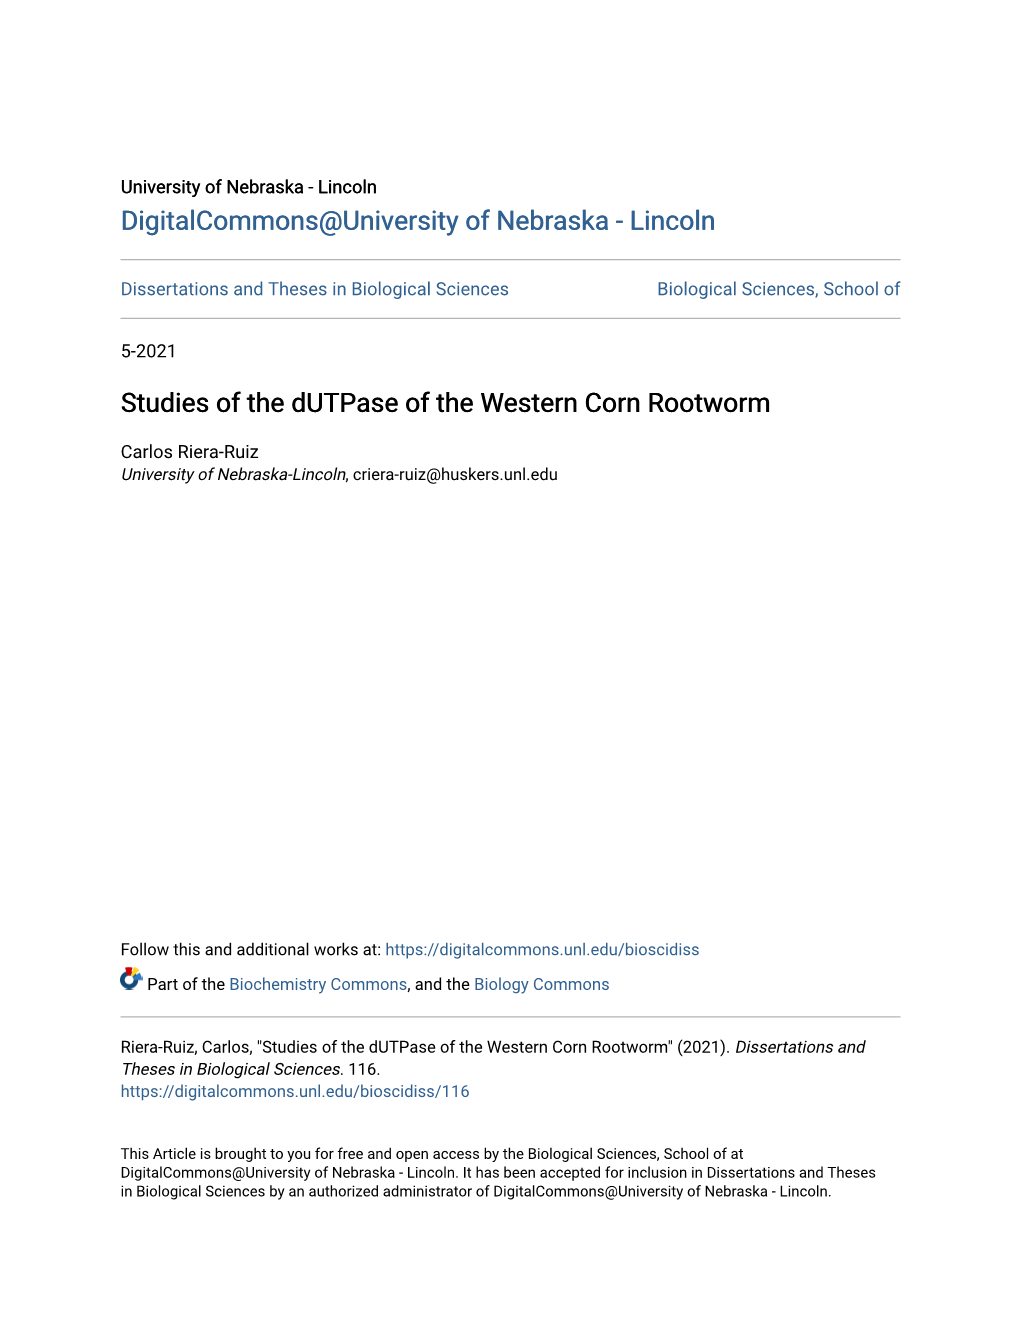 Studies of the Dutpase of the Western Corn Rootworm